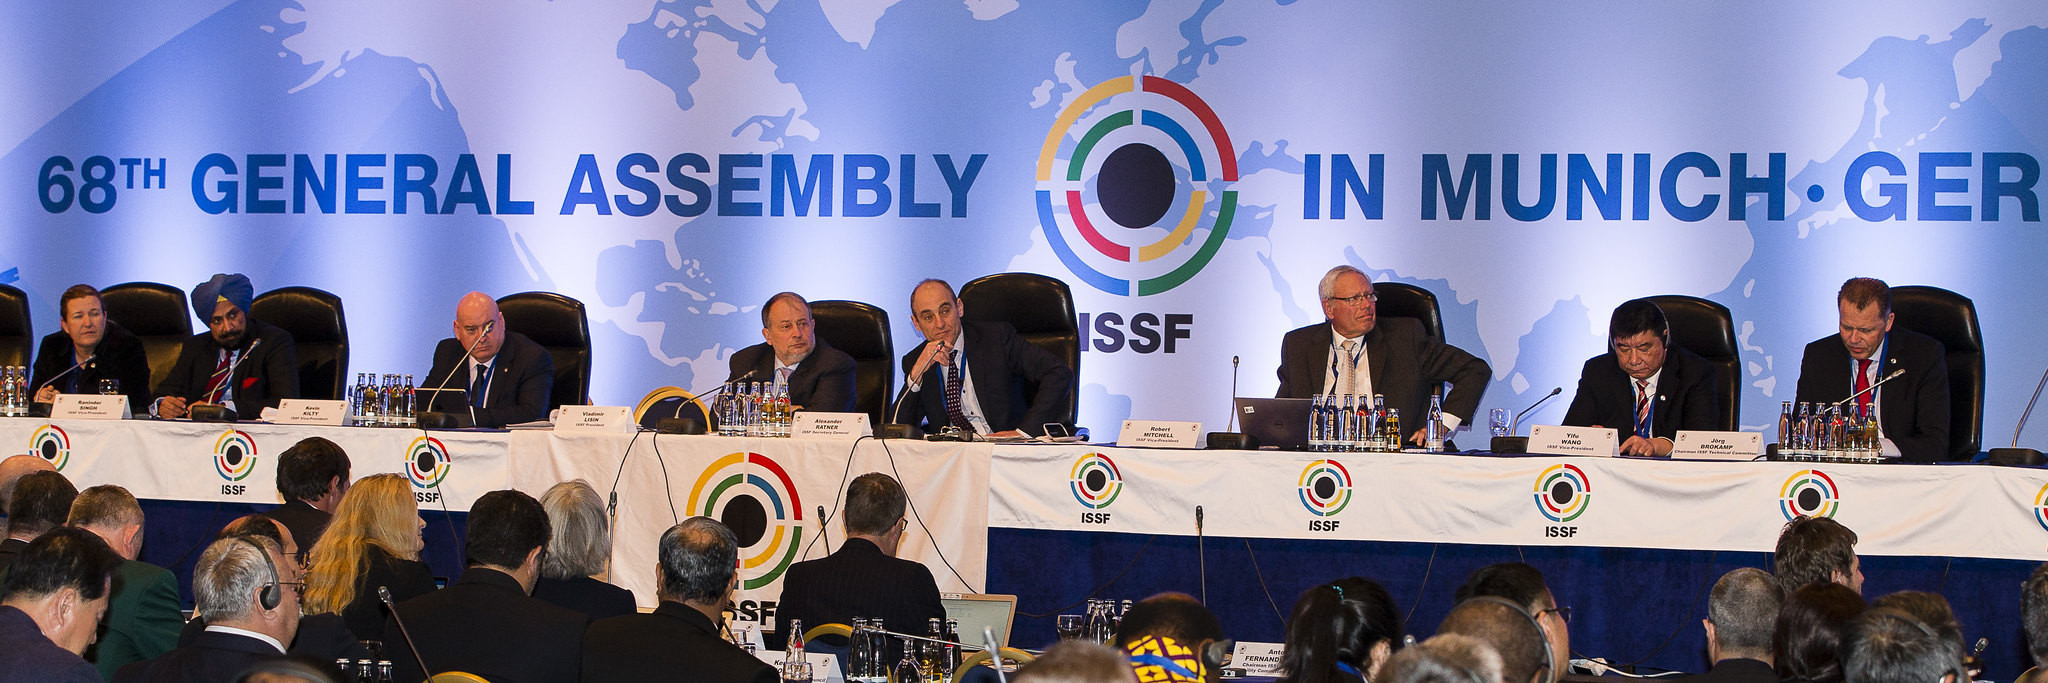 The proposed changes could have a drastic effect on the ISSF membership ©ISSF